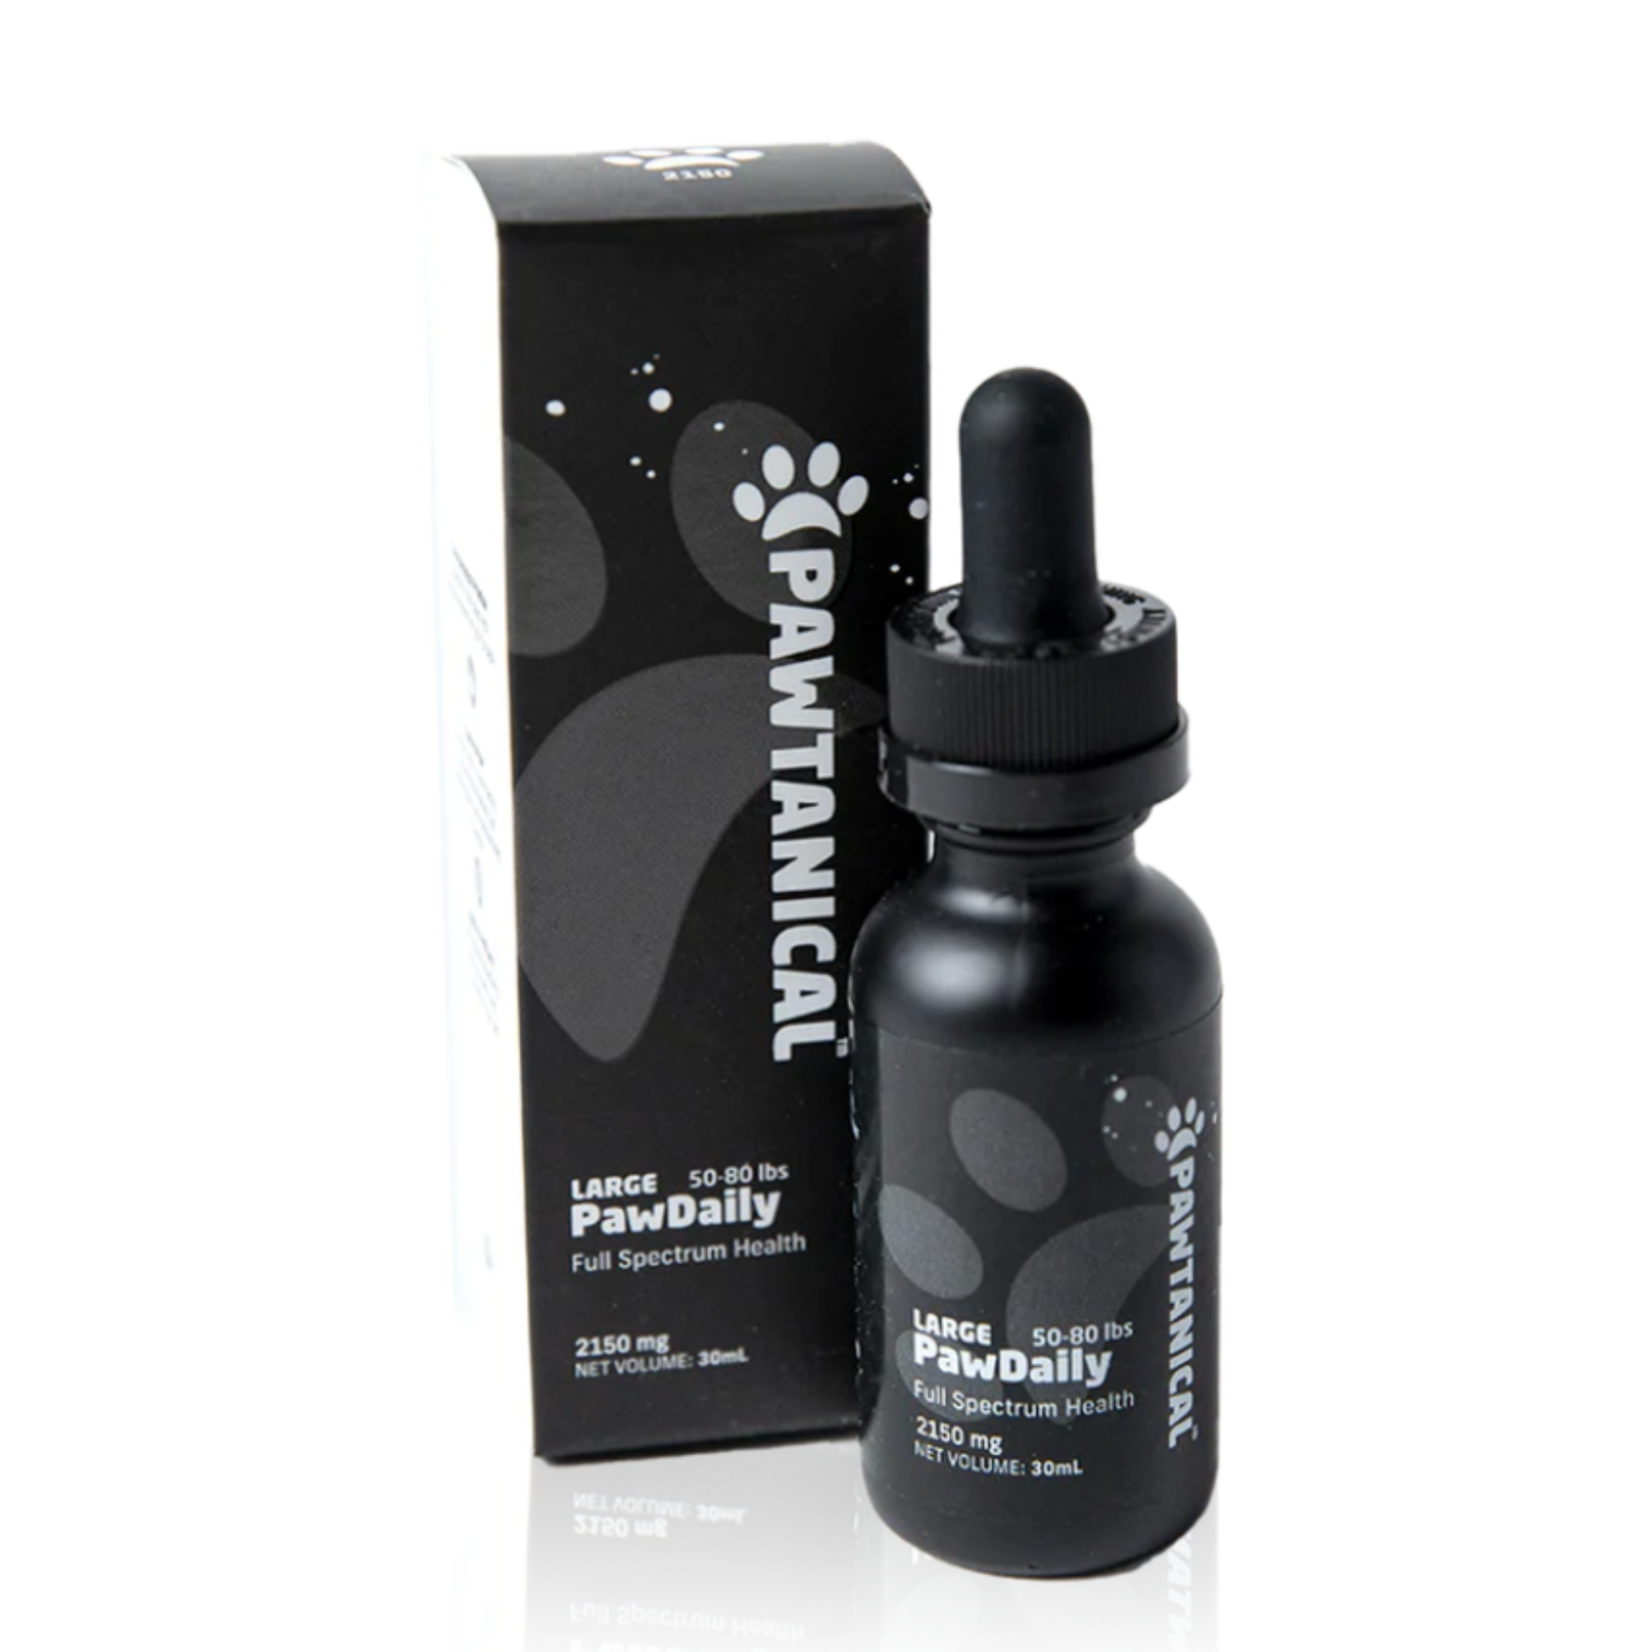 Pawtanicals Pawtanicals: PawDaily Full Spectrum Hemp Health Oil, Large 2150mg